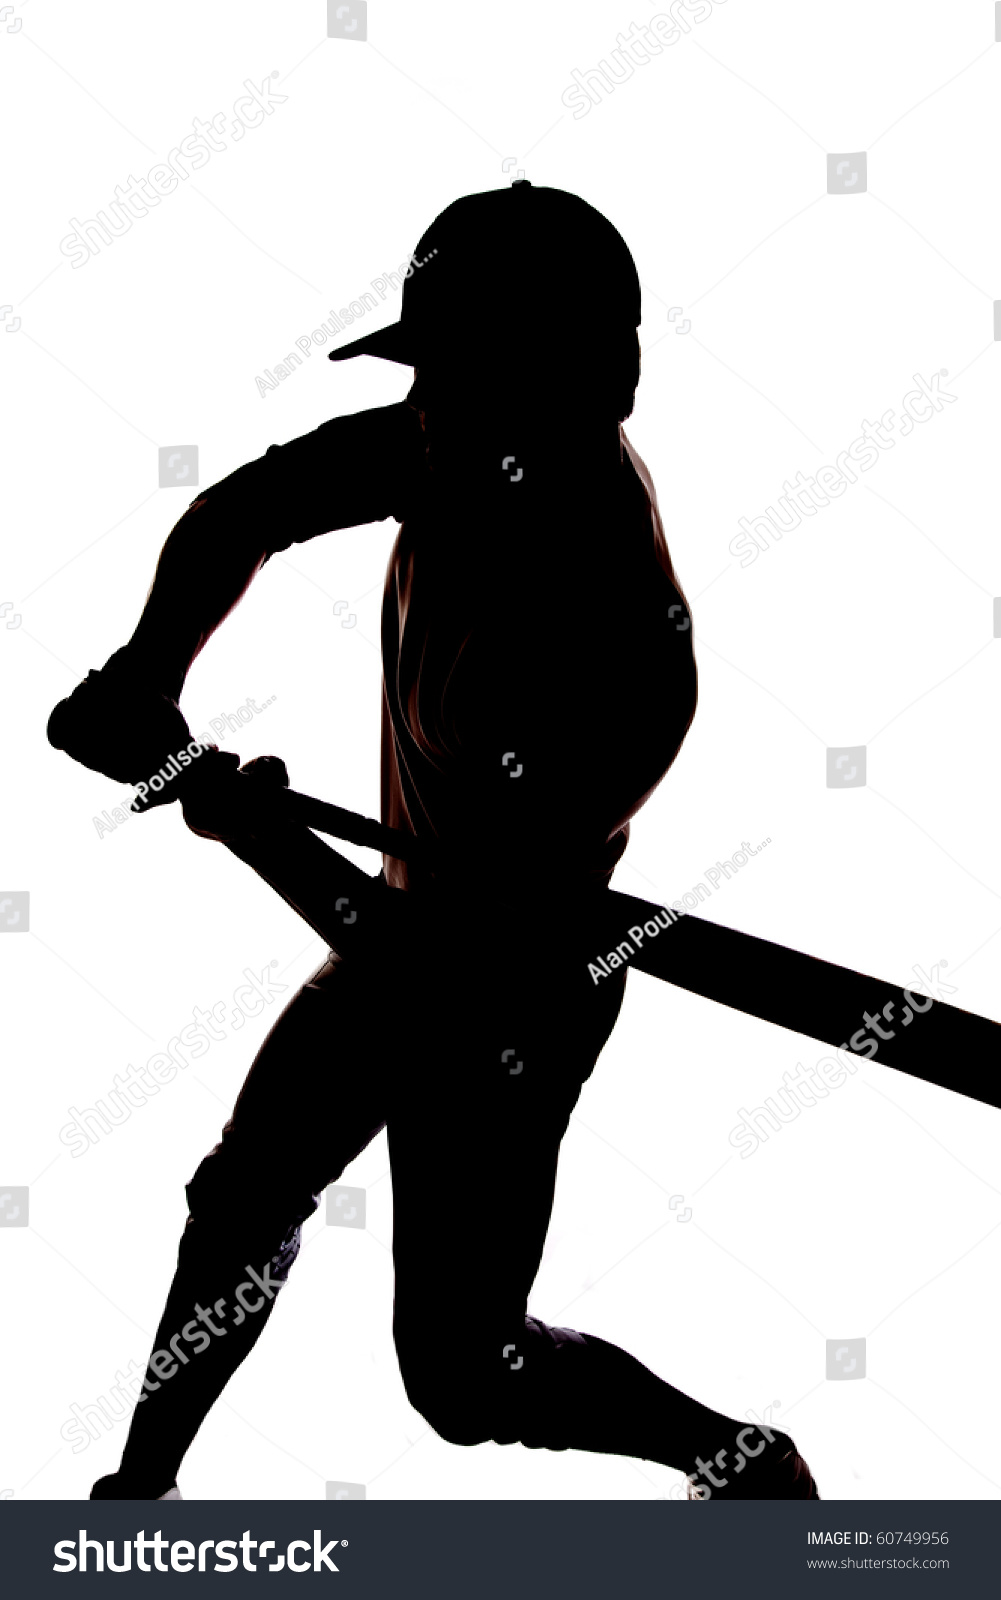 A Man Is Silhouetted On A White Background Beginning To Swing His Bat ...